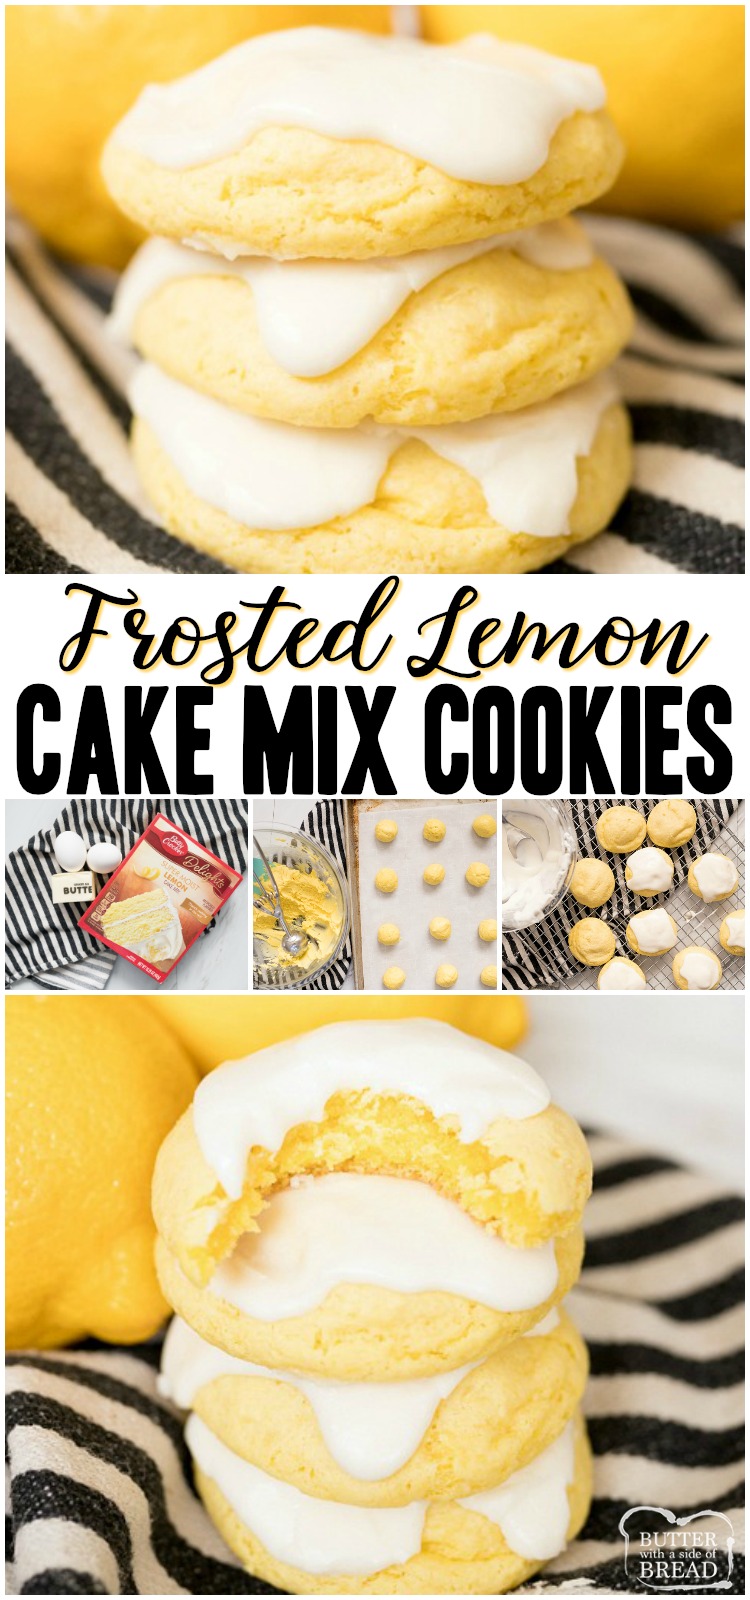 Lemon Cake Mix Cookies are soft & delicious lemon cookies made using a Lemon Cake Mix, butter and eggs. Topped with a sweet lemon glaze, this quick & easy lemon cake mix cookie recipe is the best! #lemon #cookies #cakemix #cookie #recipe #dessert #baking #lemons from BUTTER WITH A SIDE OF BREAD